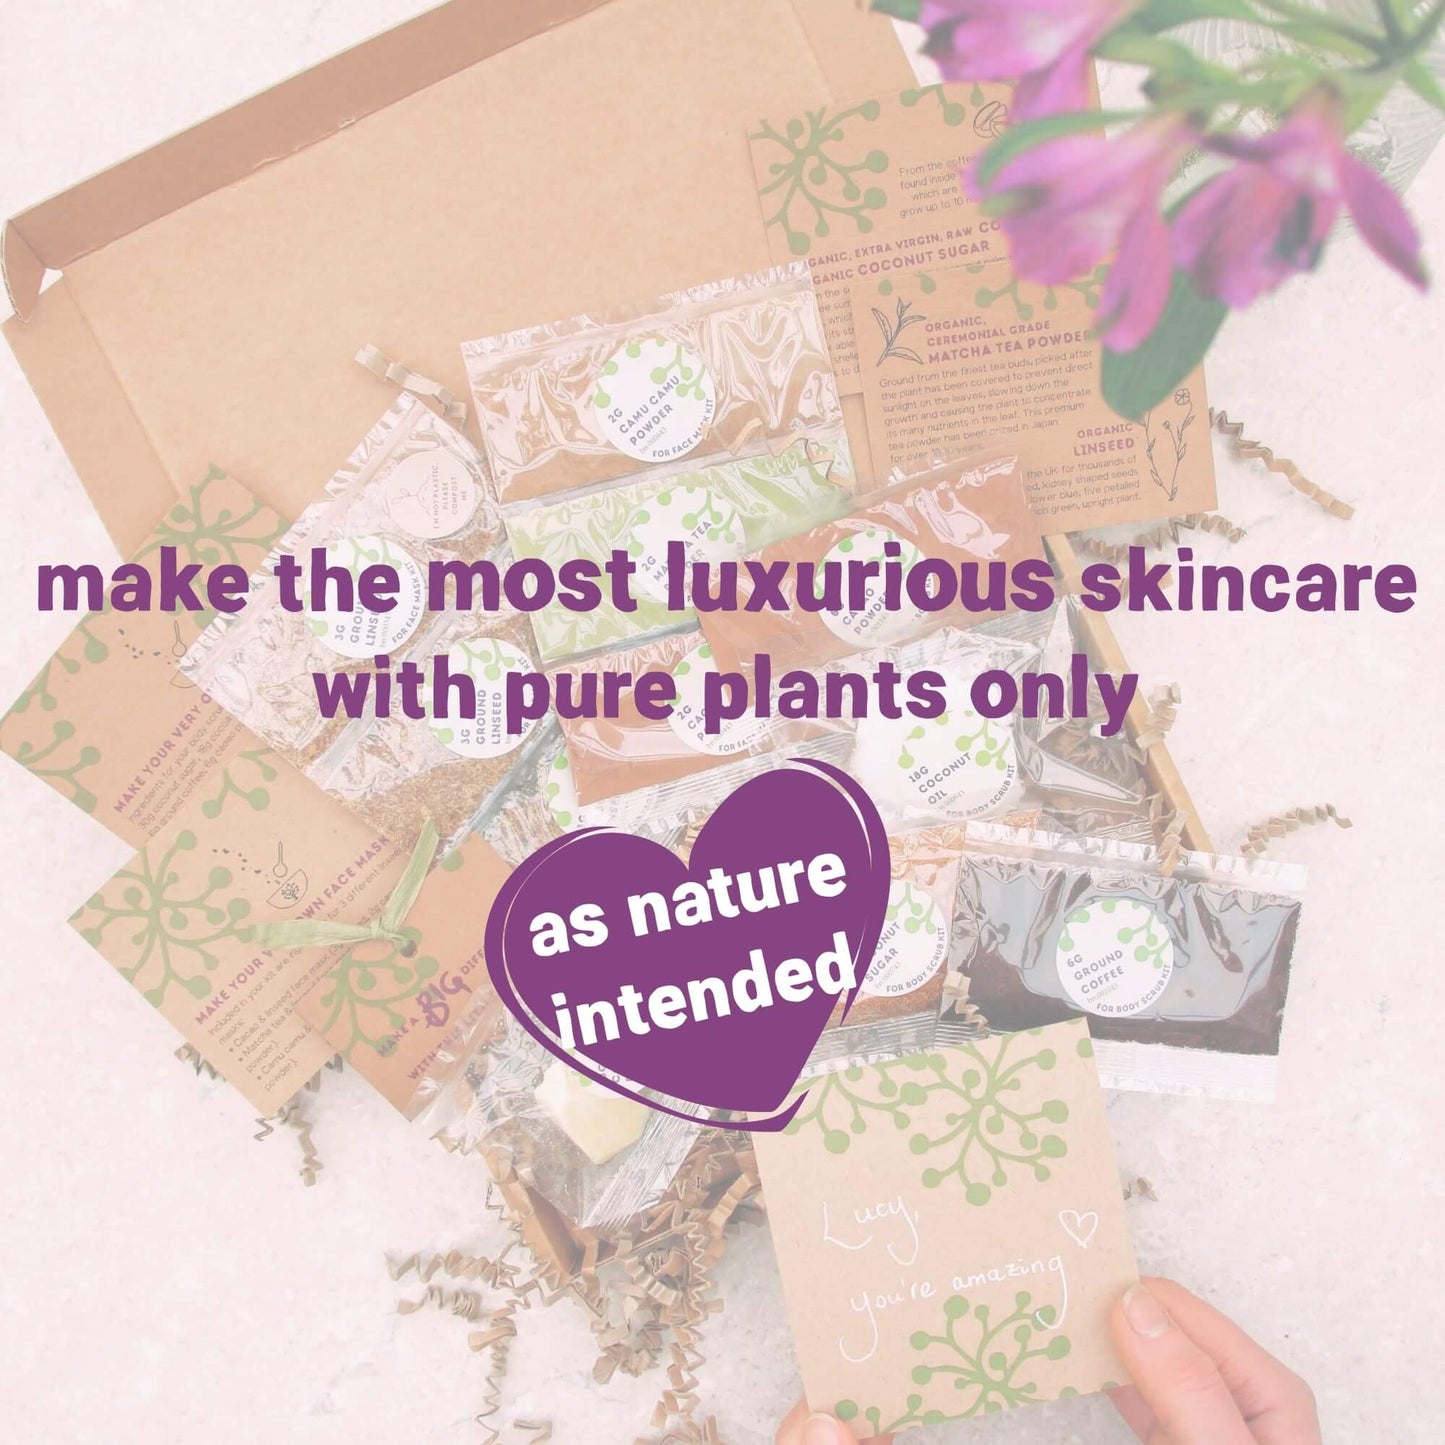 eco-friendly skincare kit inside thank you letterbox gift